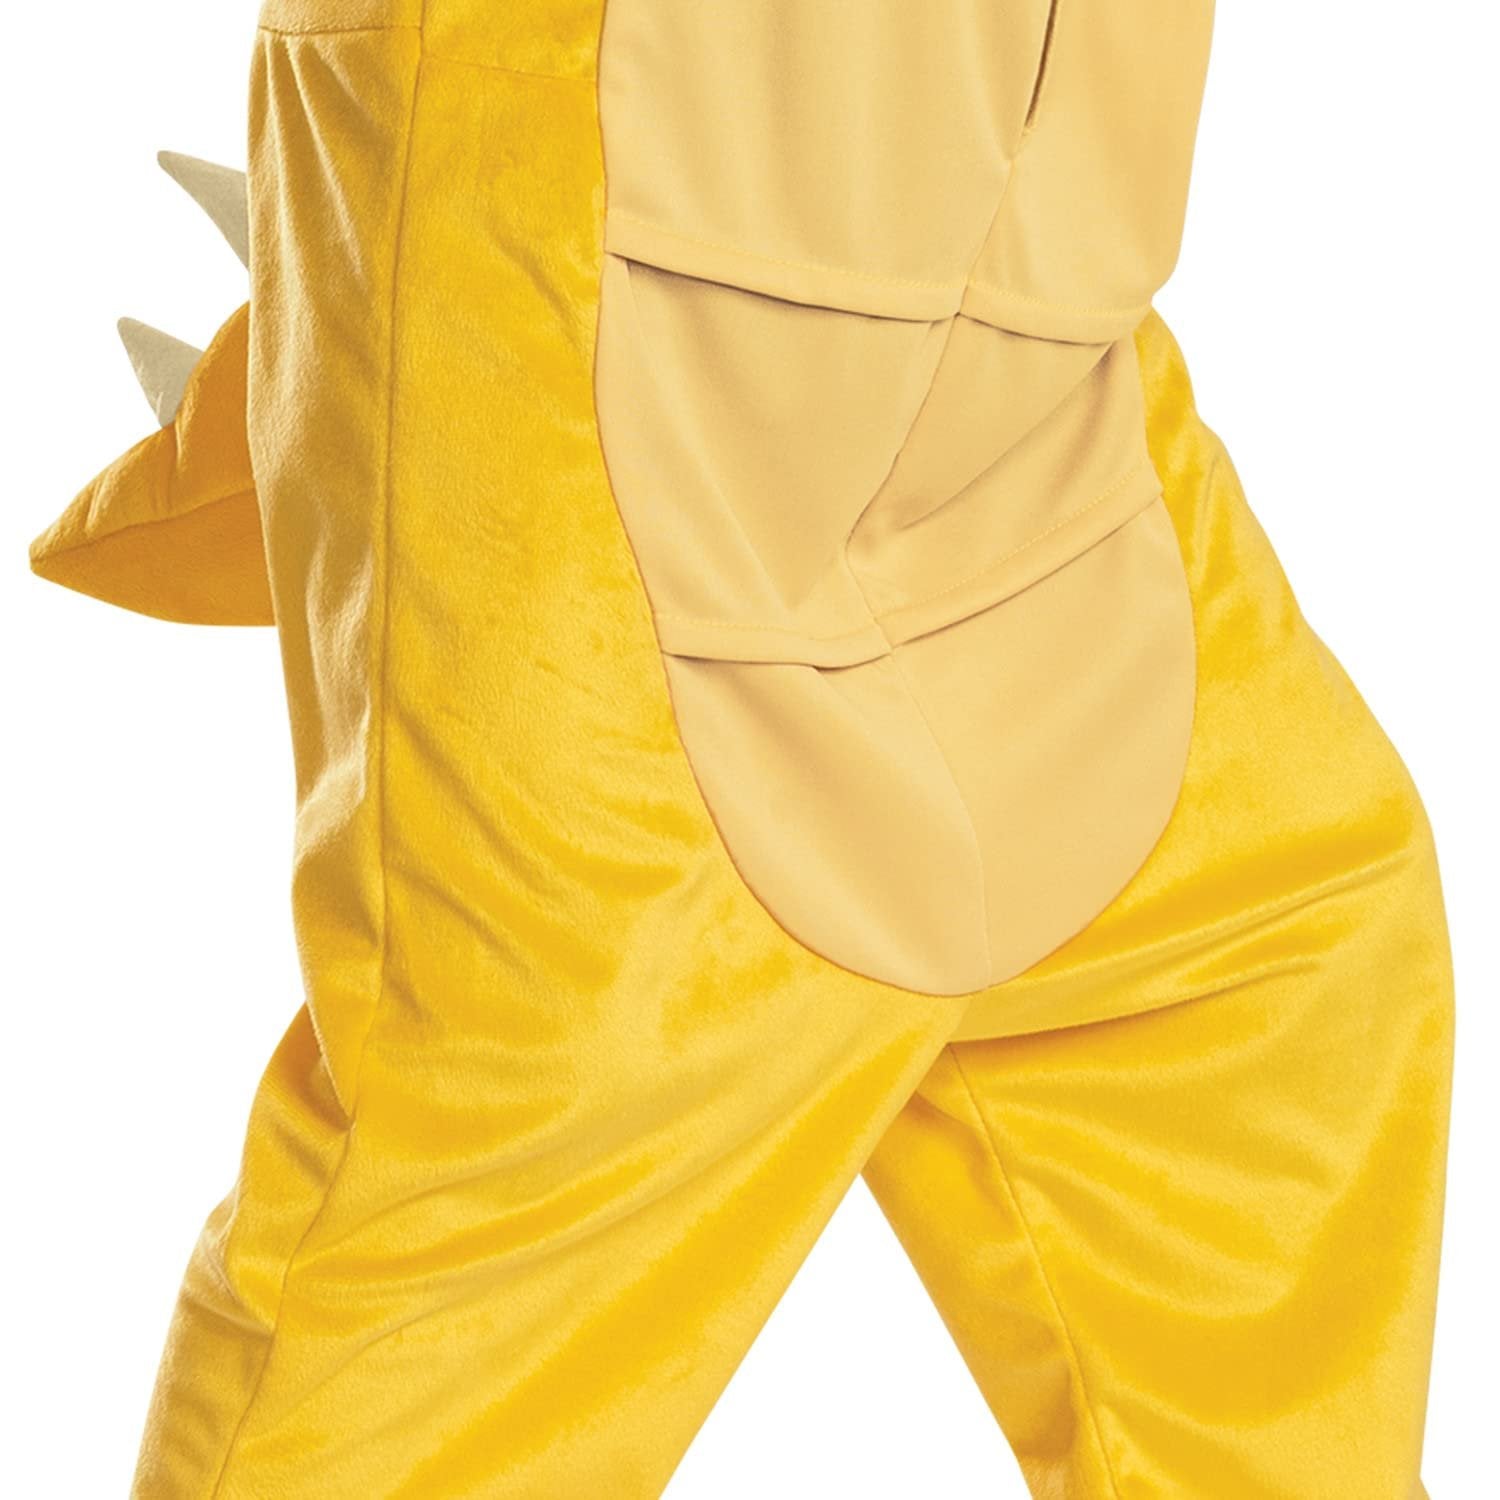 Bowser Costume Hooded Jumpsuit, Official Super Mario Character Costume for Kids, Size (7-8)